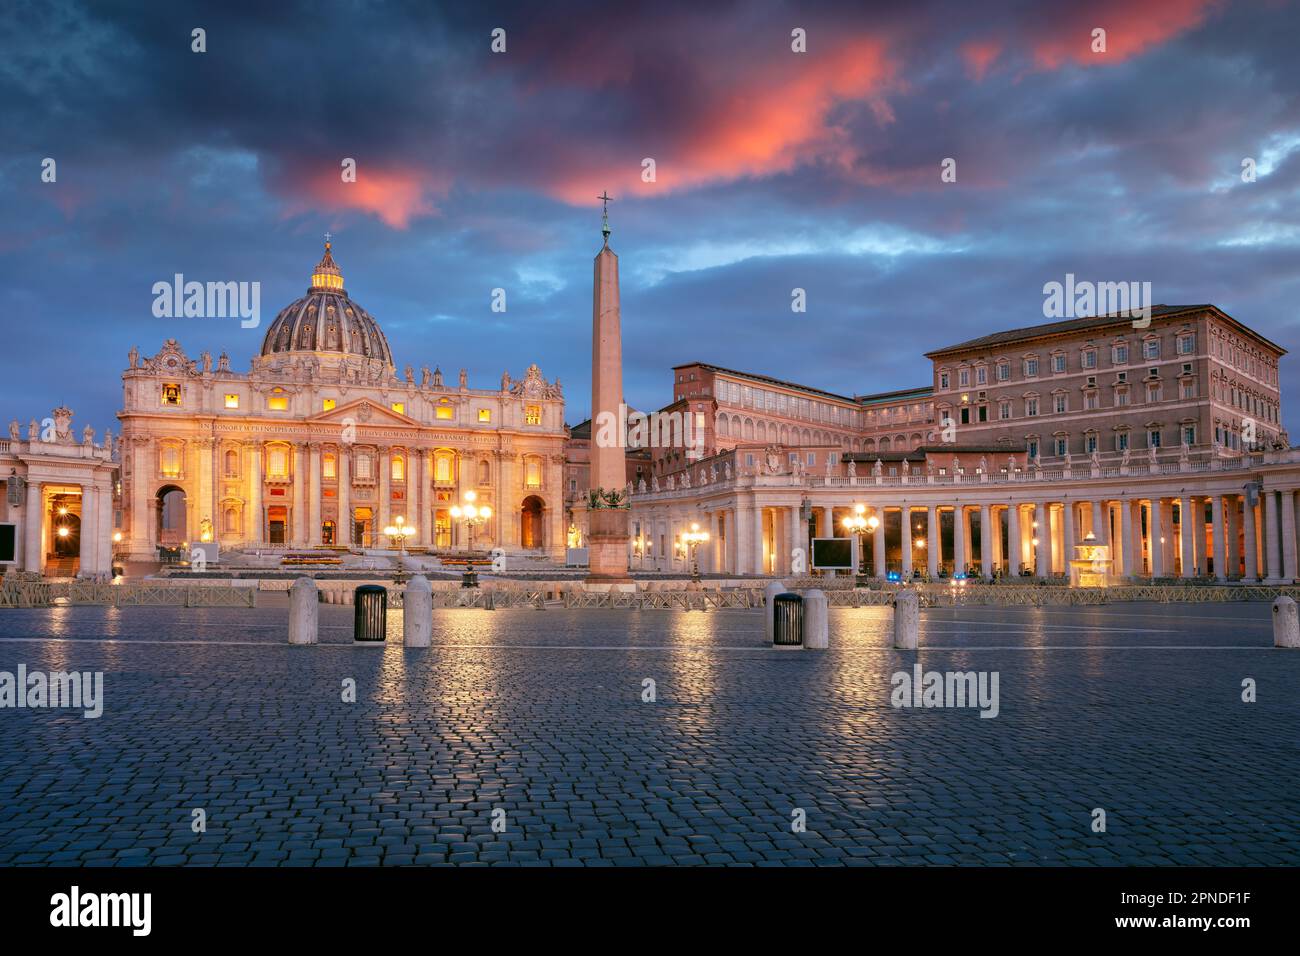 Vatican City, Rome, Italy. Cityscape image of illuminated Saint Peter's Basilica and St. Peter's Square, Vatican City, Rome, Italy at sunrise. Stock Photo